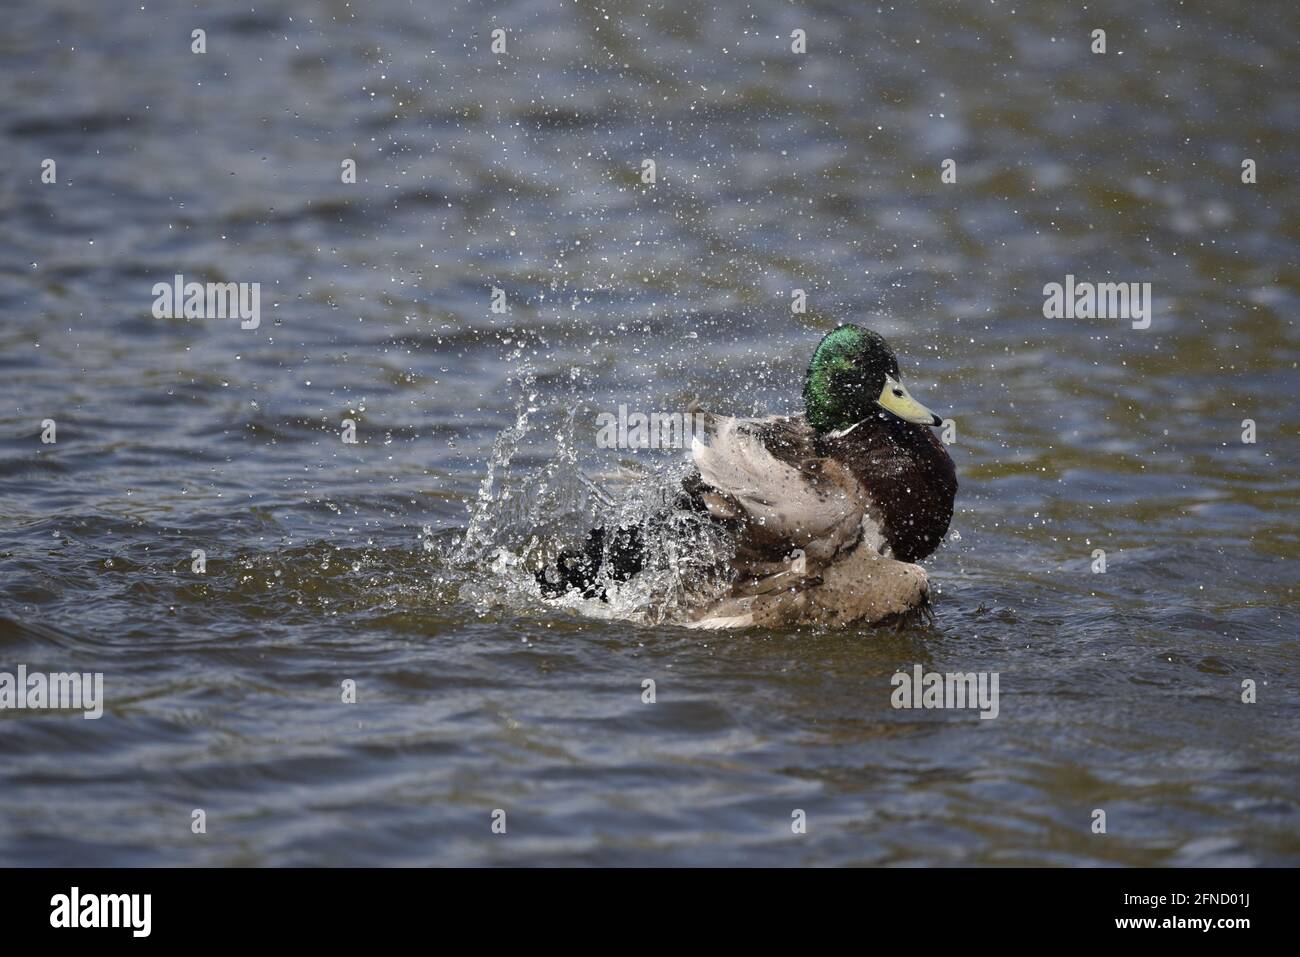 Male Mallard Duck (Anas platyrhynchos) in Right Profile, Splashing in a Nature Reserve Lake in the UK in Spring, Covered in Water Droplets and Spray Stock Photo